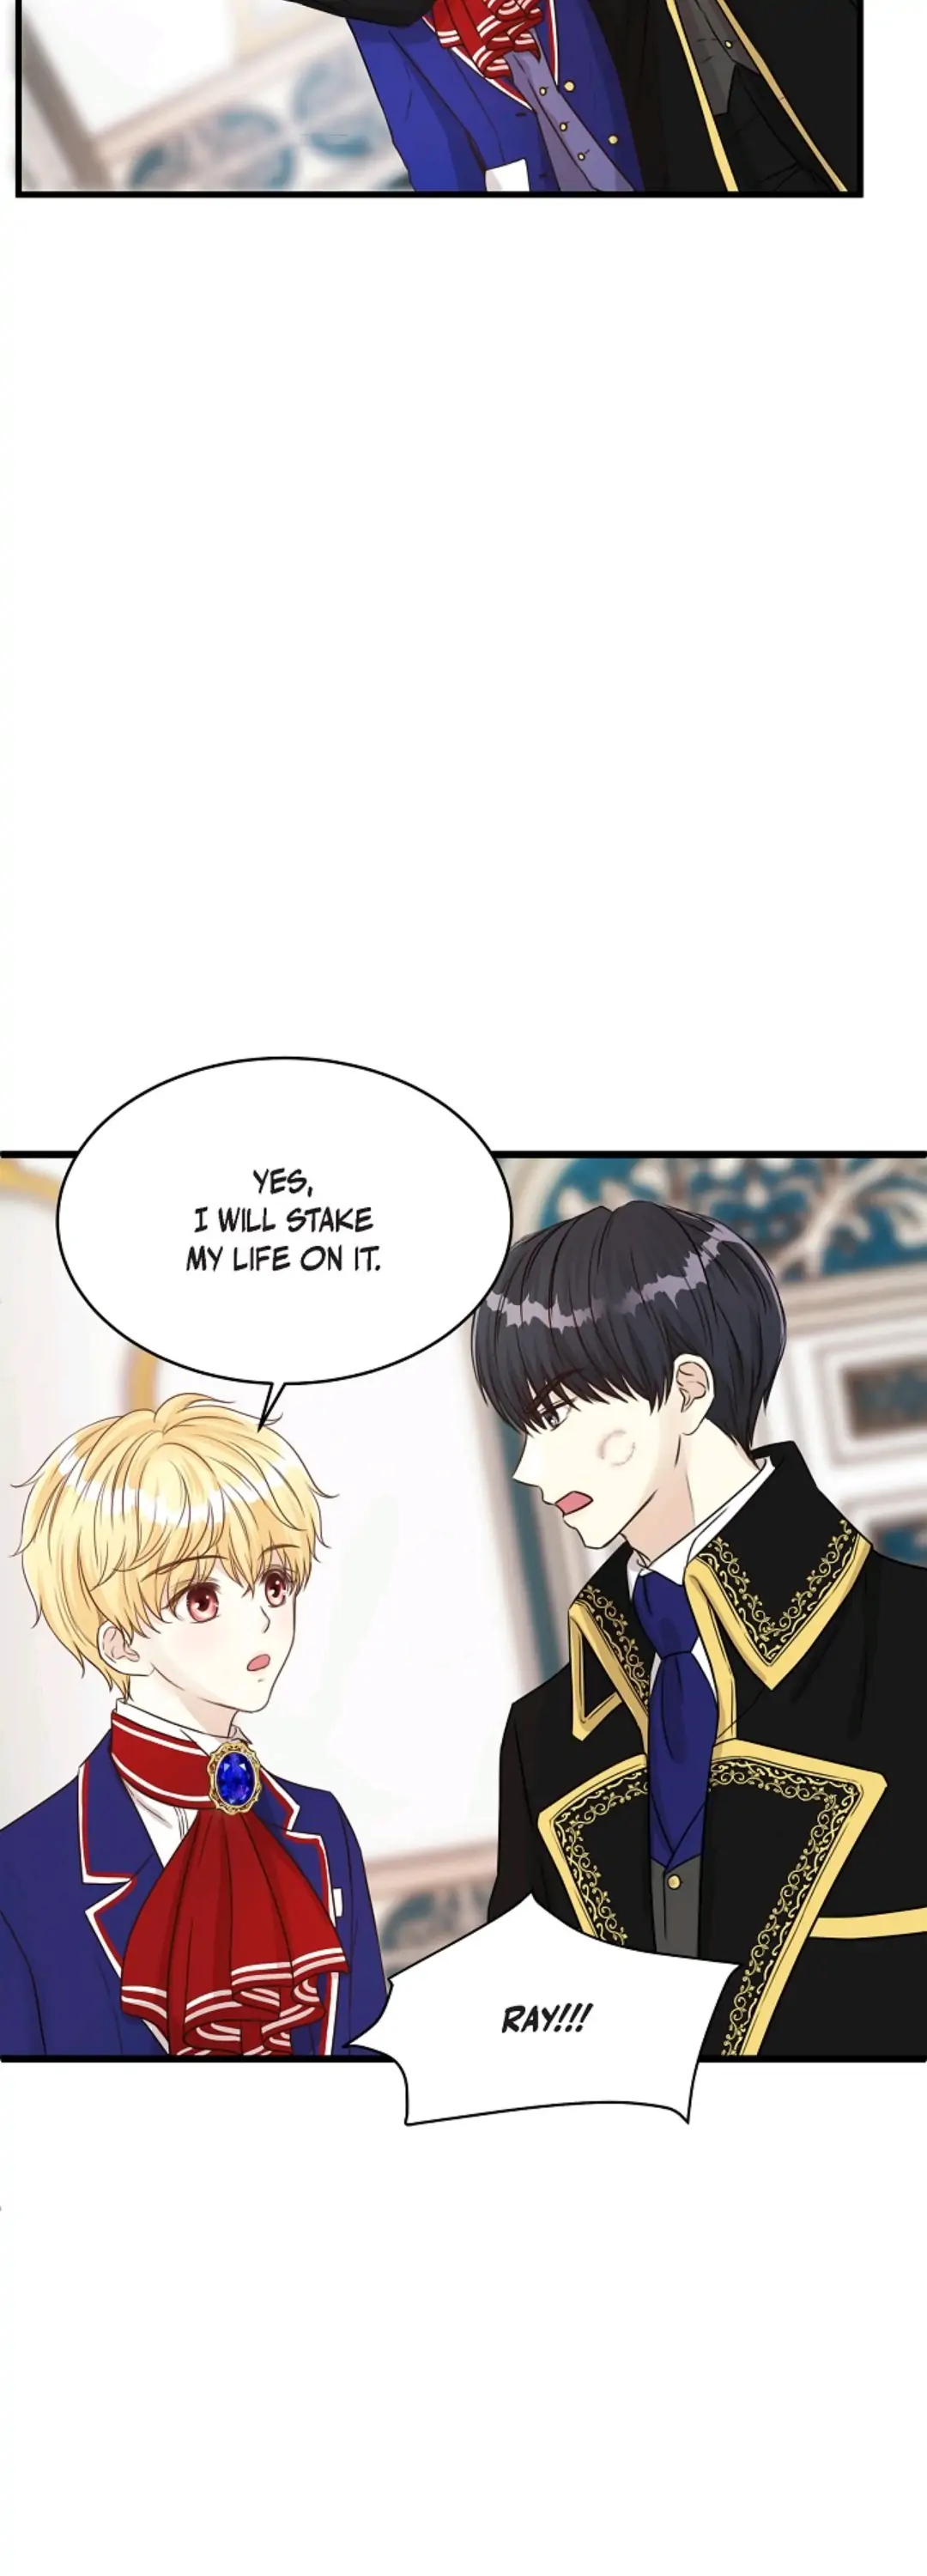 Hey, Prince! chapter 15